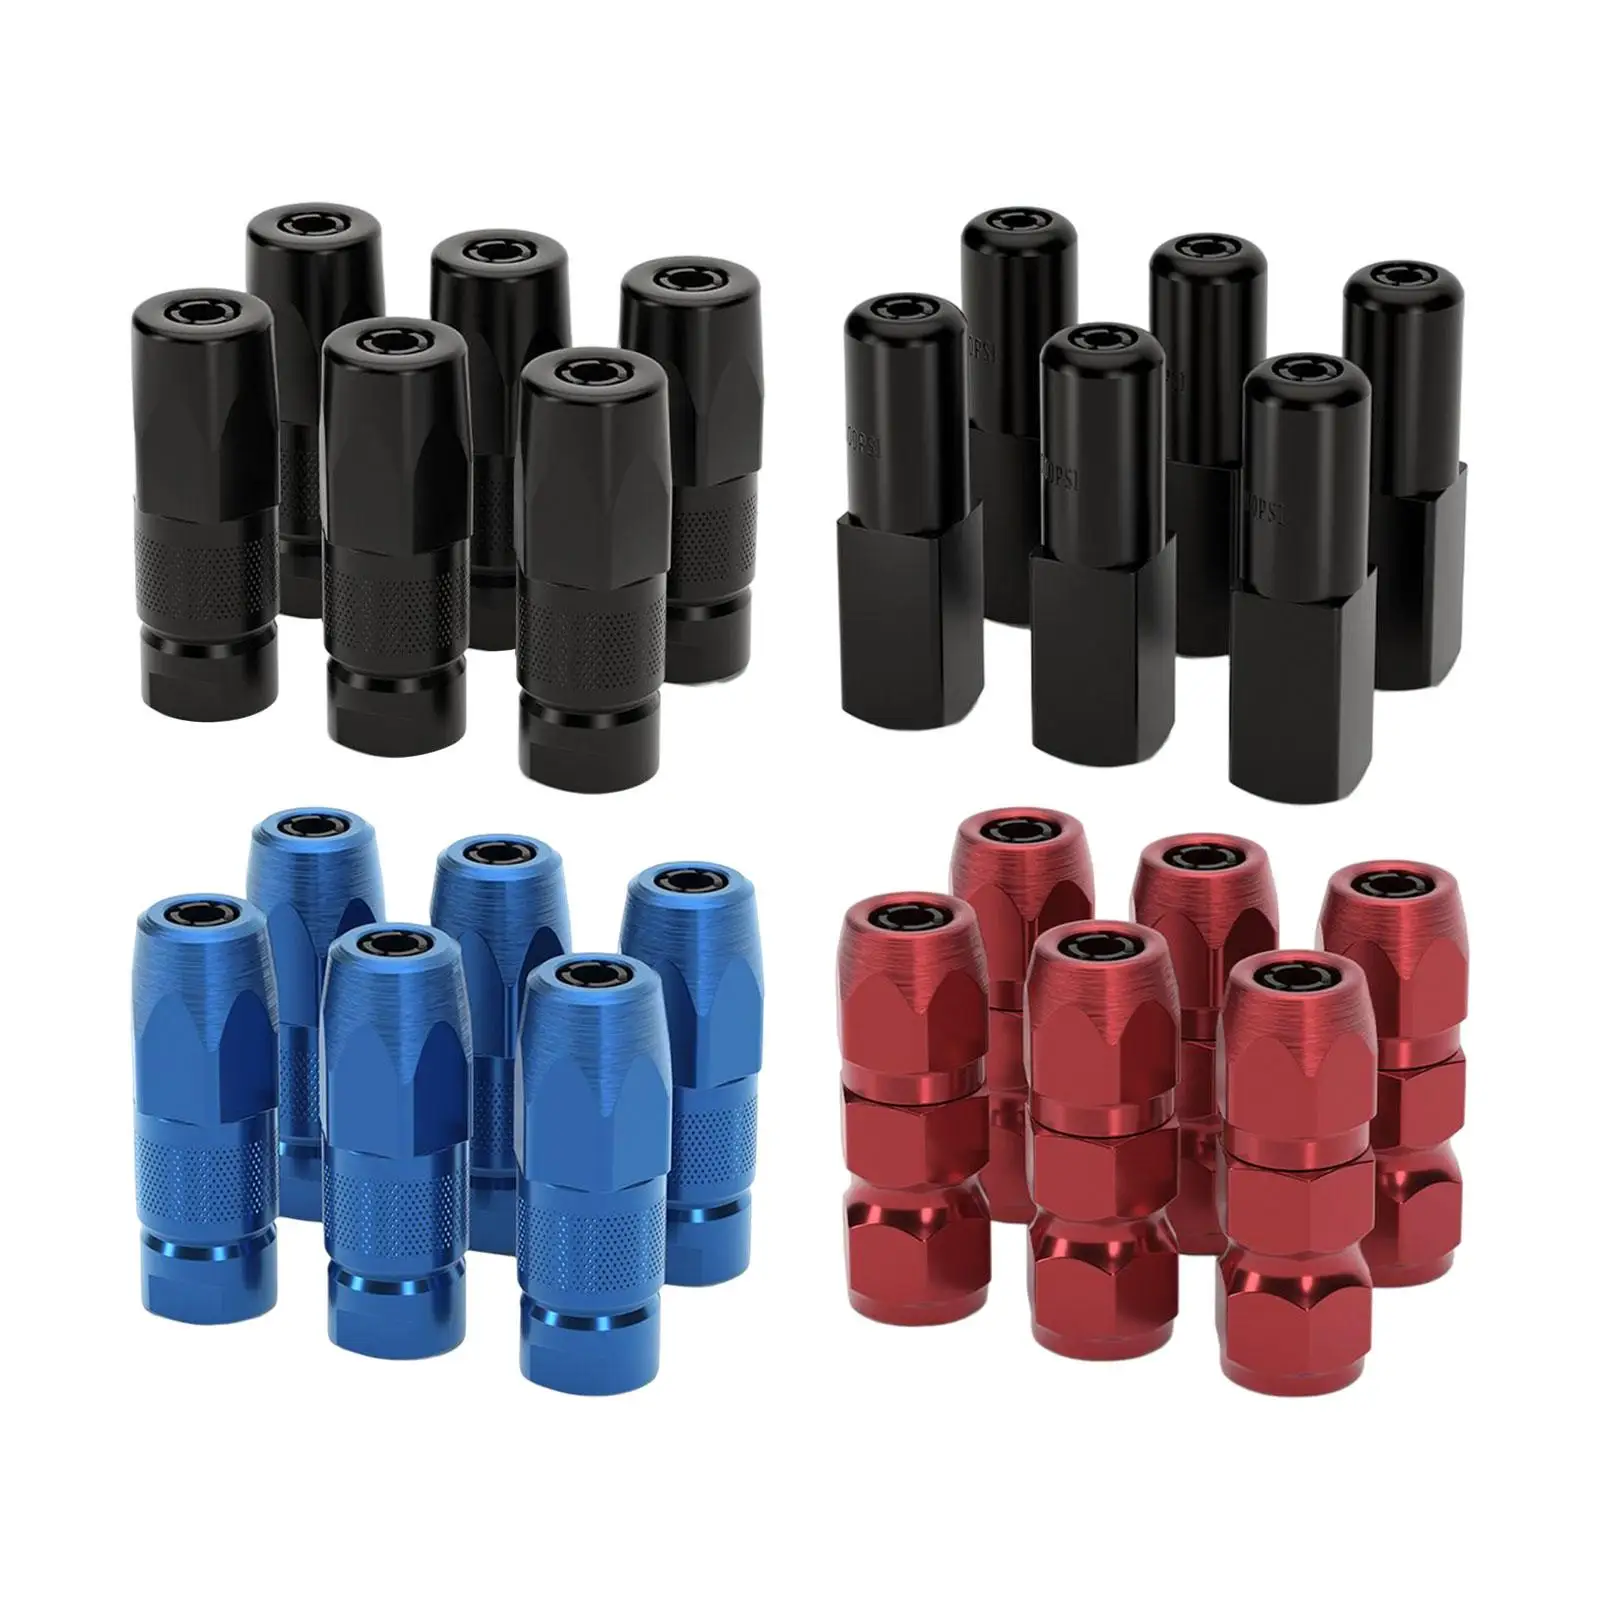 

6x Heavy Duty Self Lock Standard Grease Flat Nozzle,Grease Coupler Fitting Tip,Grease Coupler